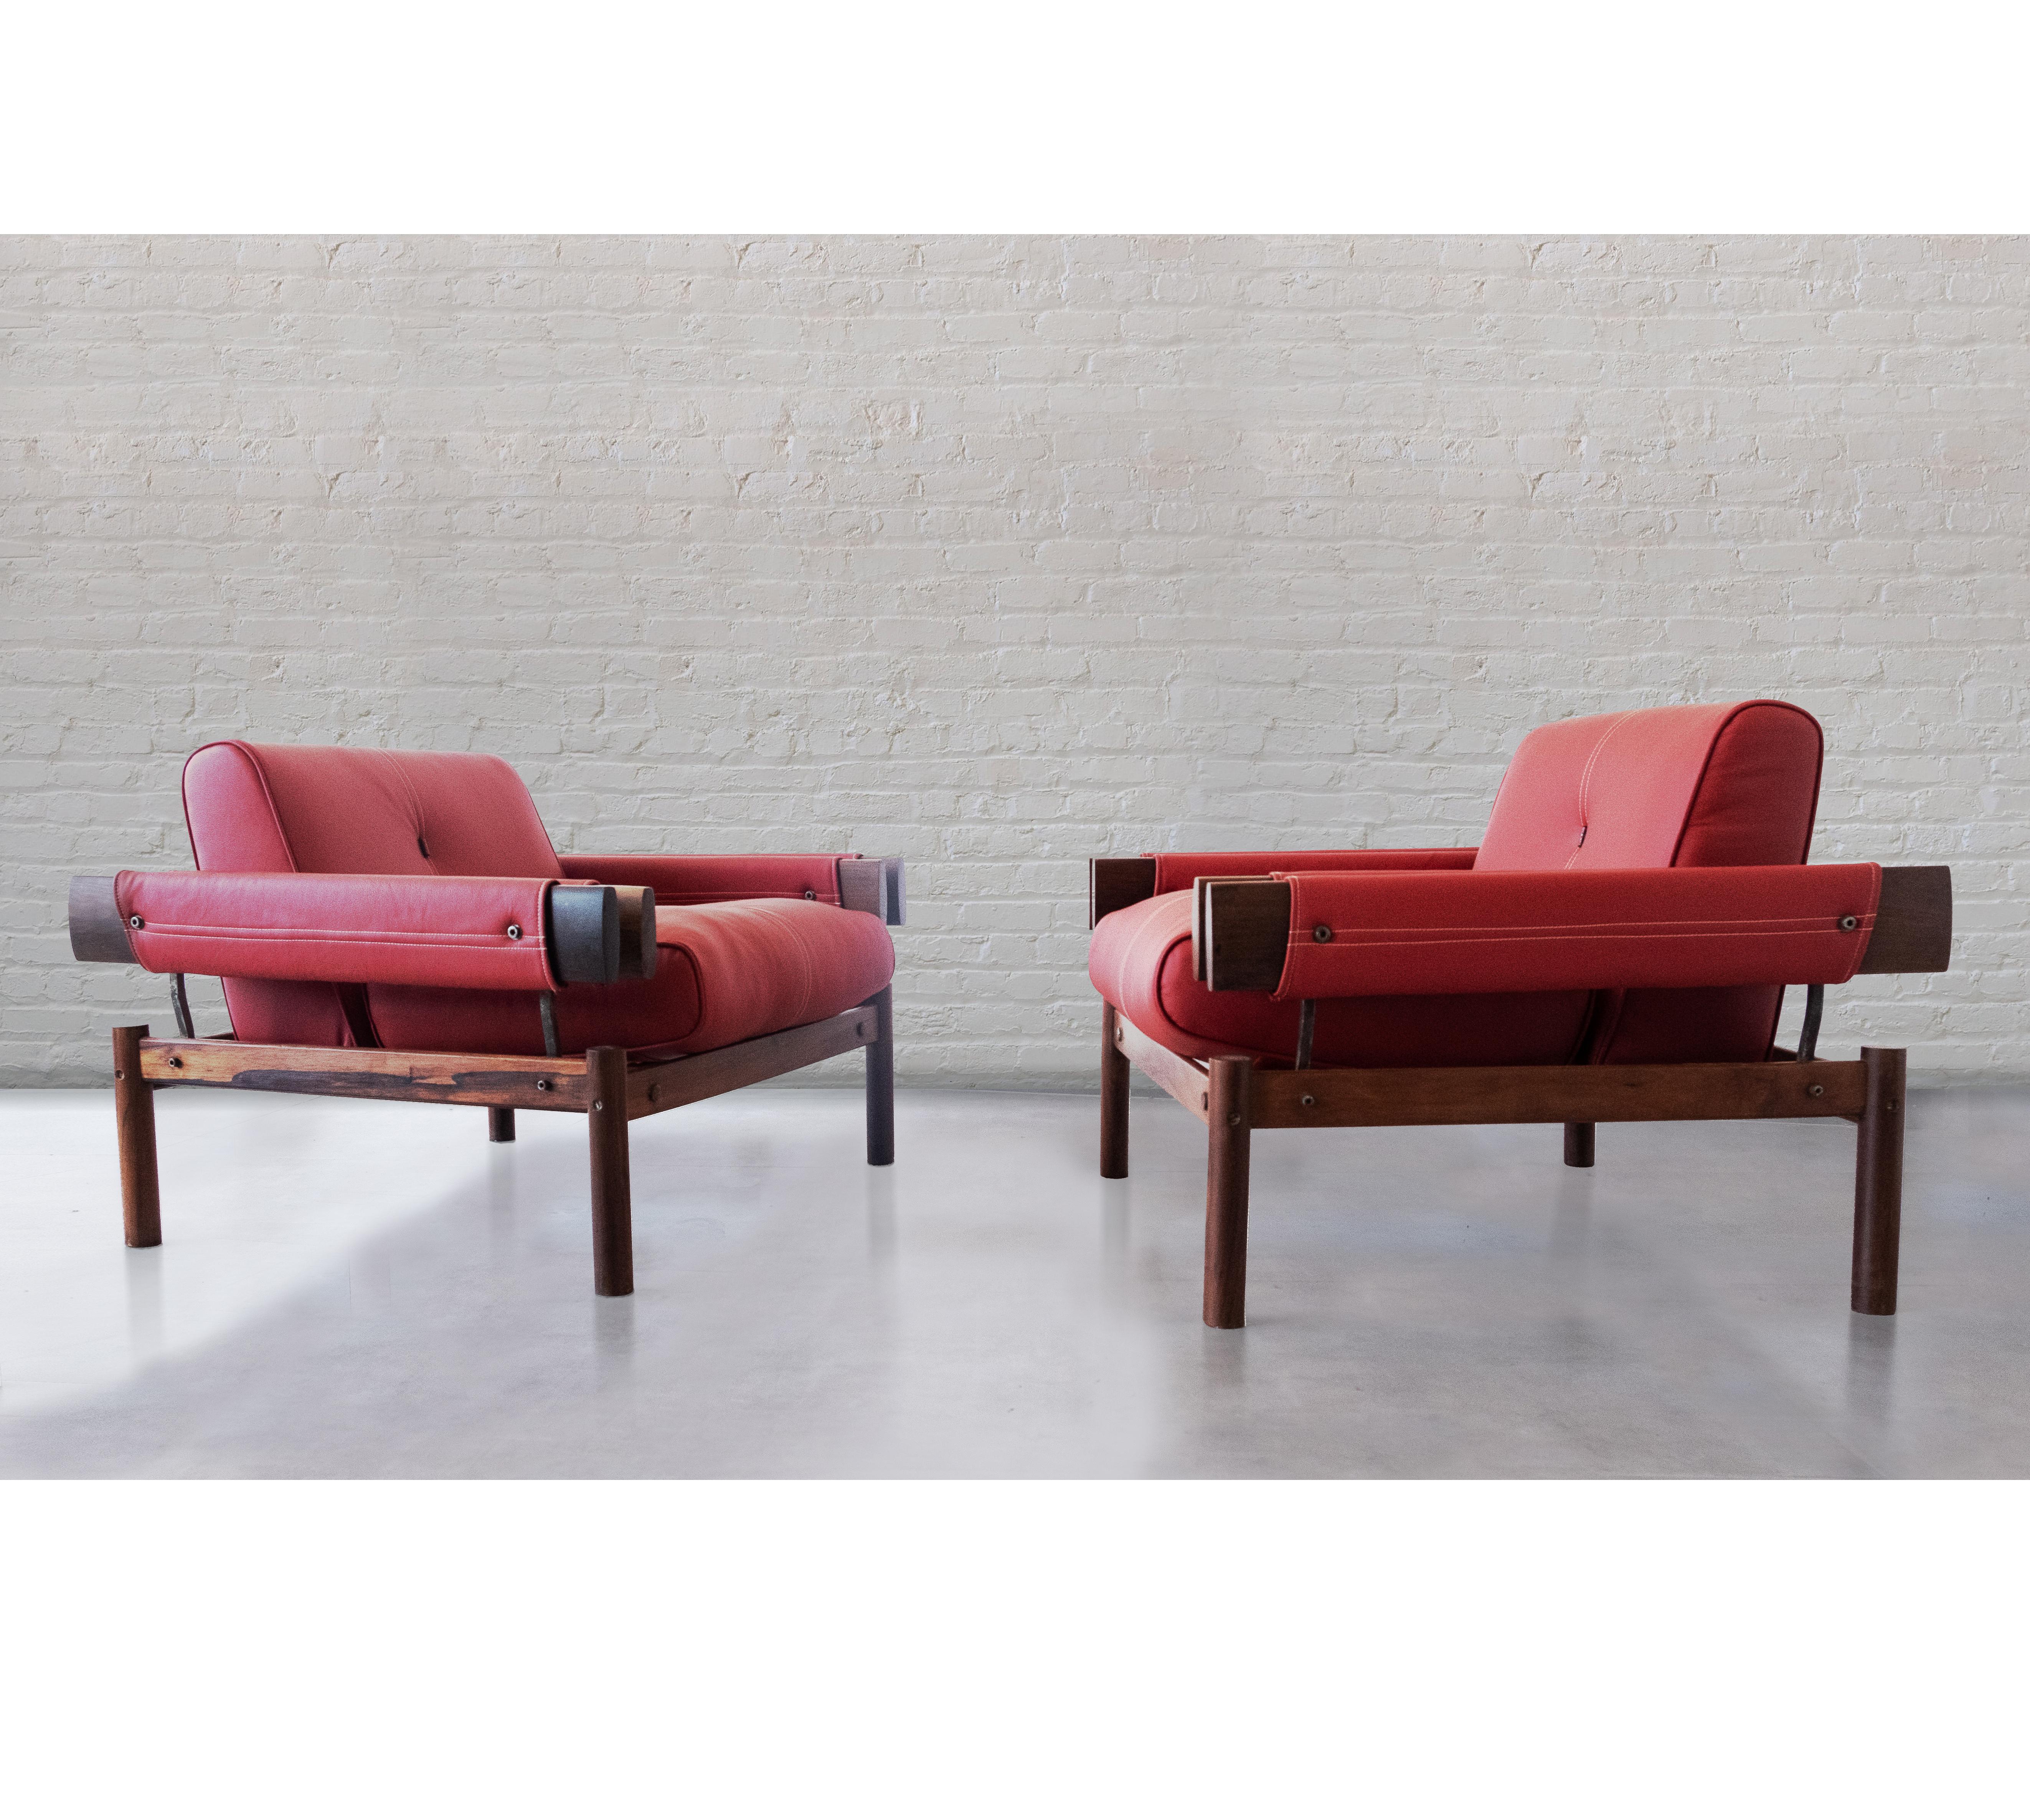 A pair of beautiful MP19 armchairs, designed and manufactured by Percival Lafer. Brazil c. 1967.

Despite the large section of wood pieces and their solidity, this design feels light, as the seats and armrests seem to float within the chair